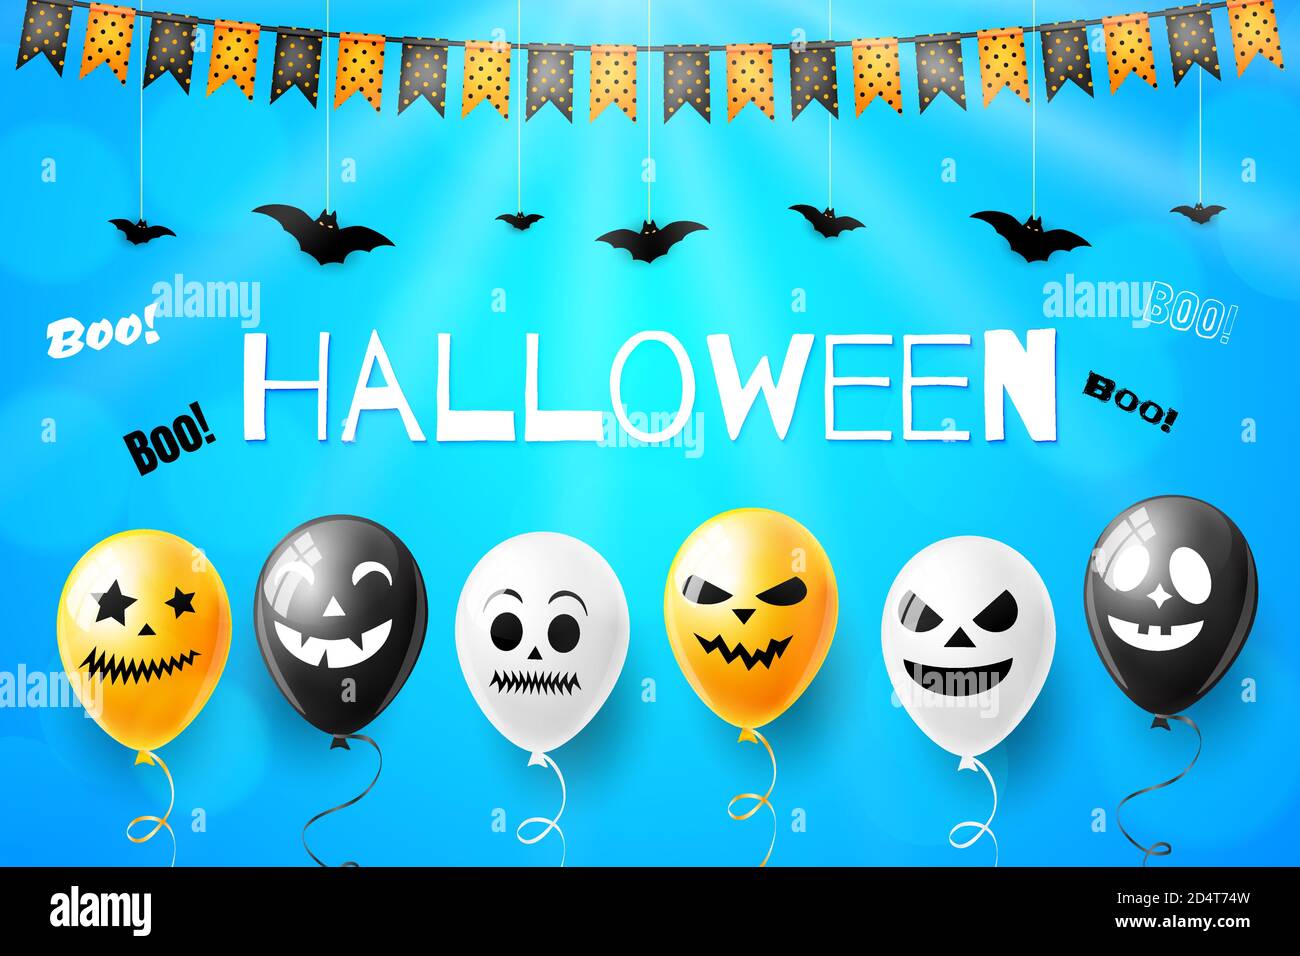 Happy Halloween vector illustration with scary air balloons for banner or poster Stock Vector